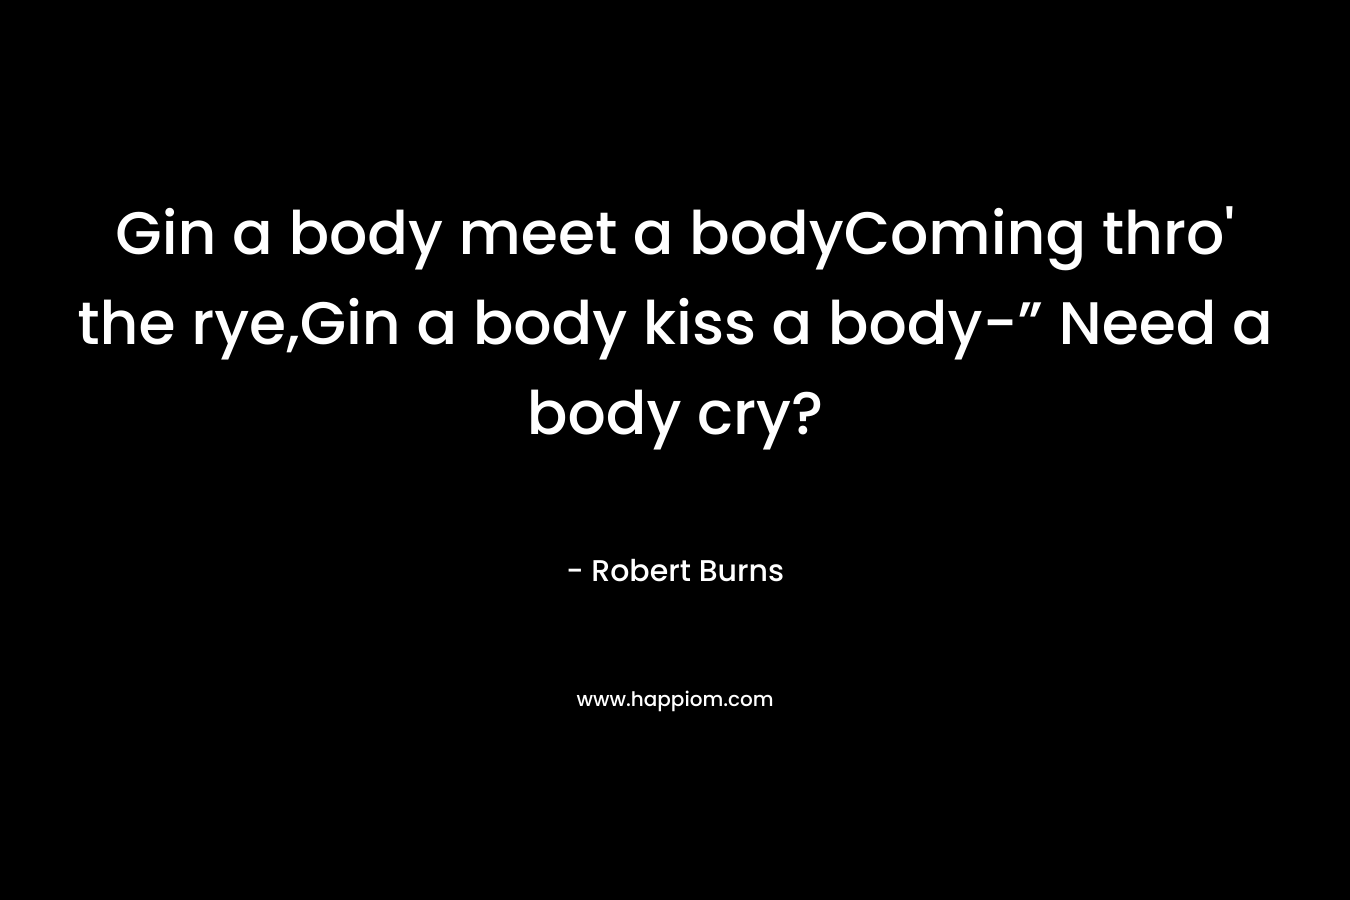 Gin a body meet a bodyComing thro' the rye,Gin a body kiss a body-” Need a body cry?